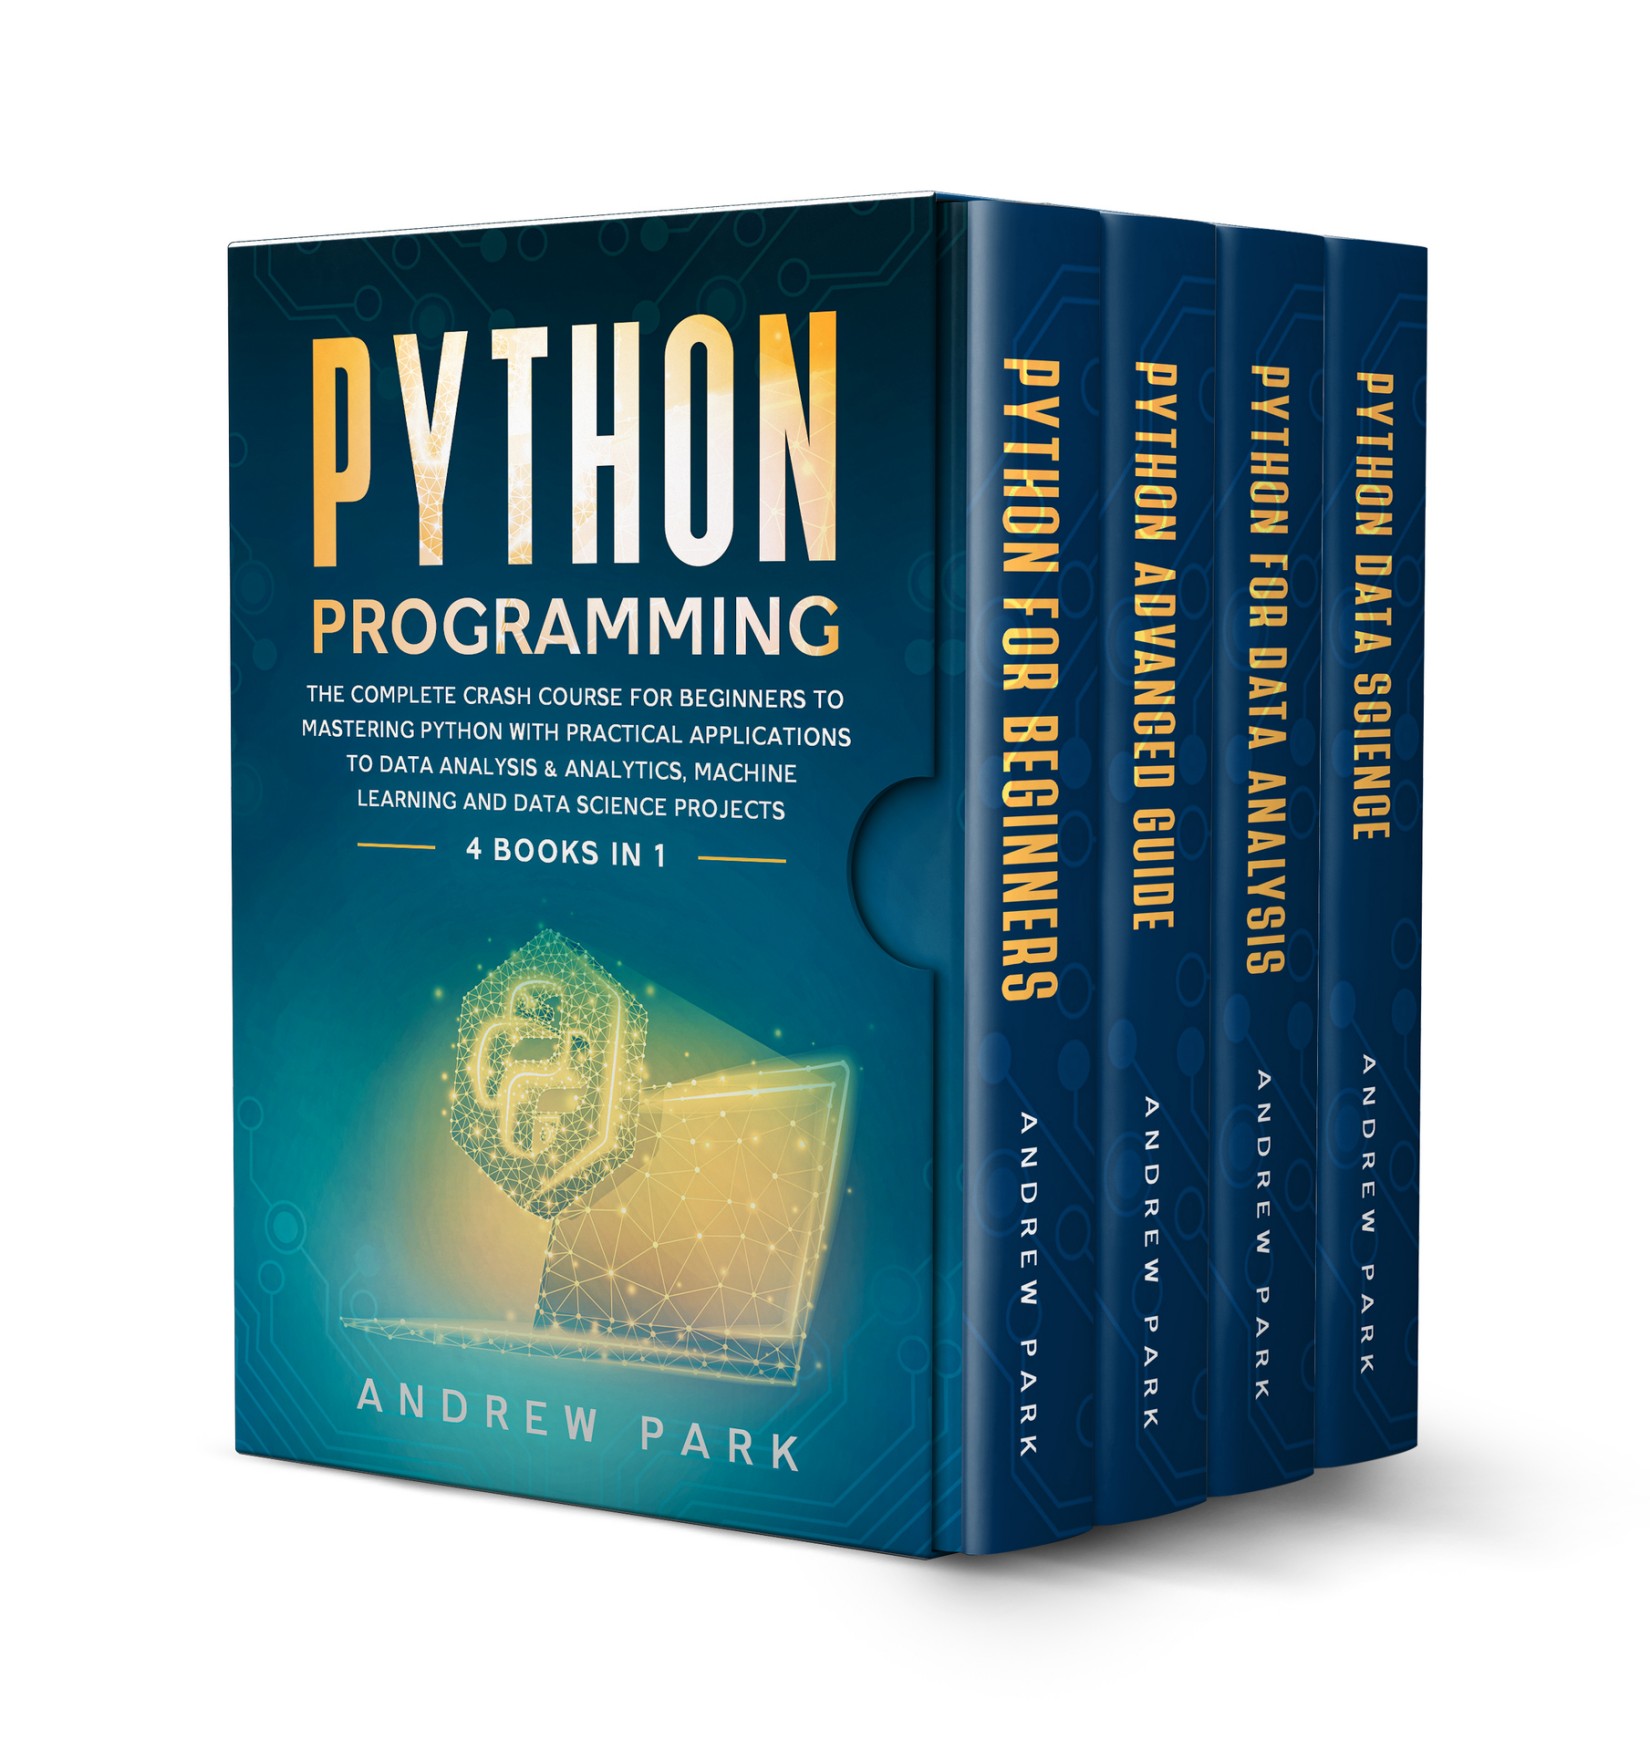 Python Programming: 4 Books in 1 - The Complete Crash Course for Beginners to Mastering Python with Practical Applications to Data Analysis & Analytics, Machine Learning and Data Science Projects